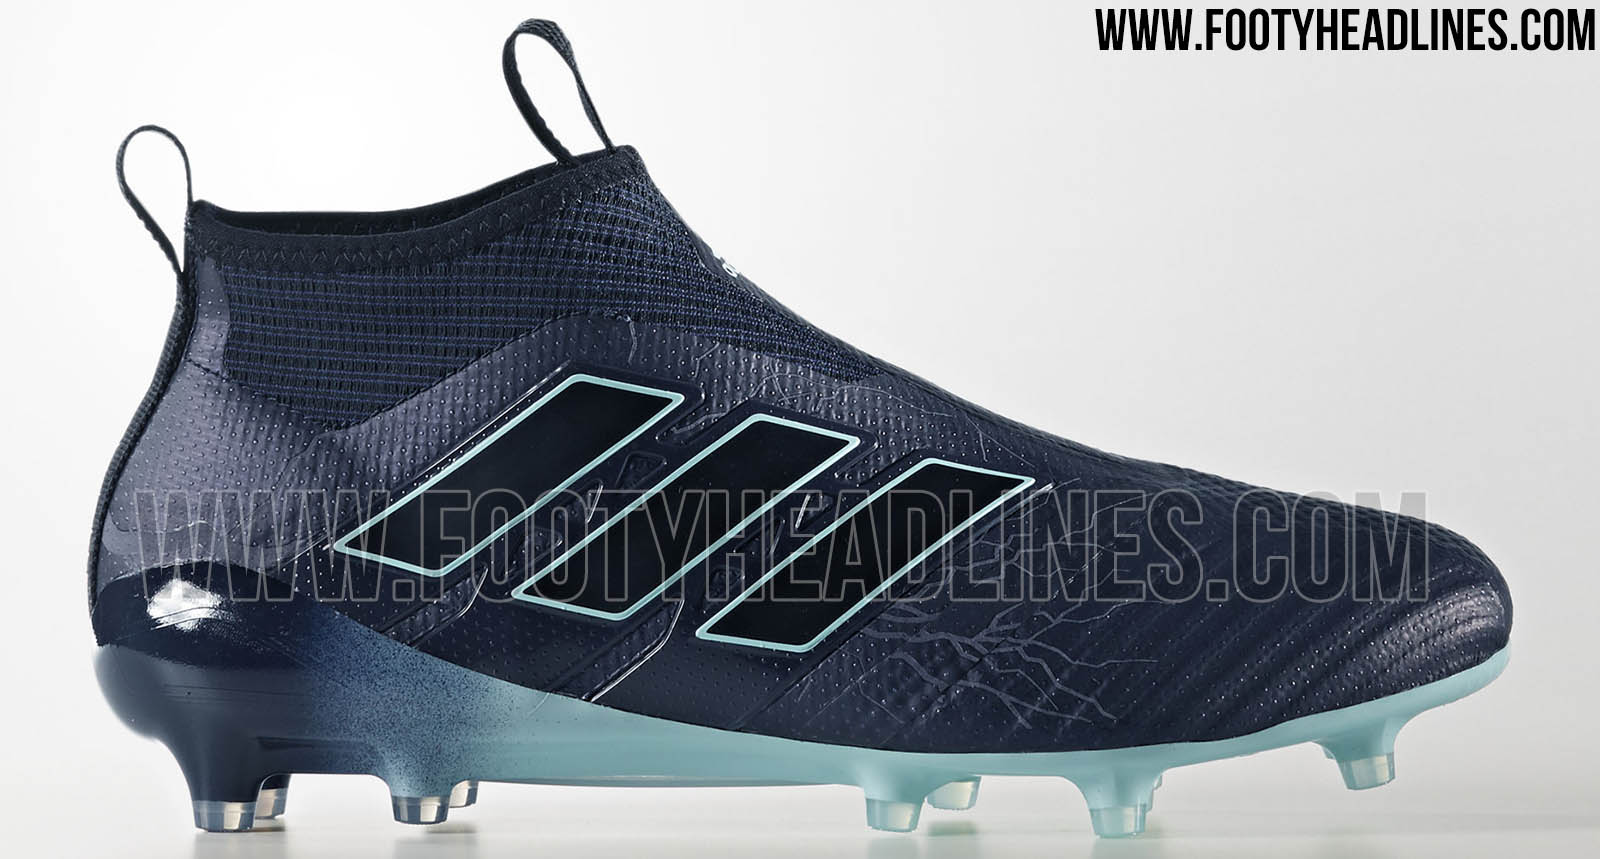 Special-Edition Adidas PureControl 2017-2018 'Thunderstorm' Boots - Footy Headlines